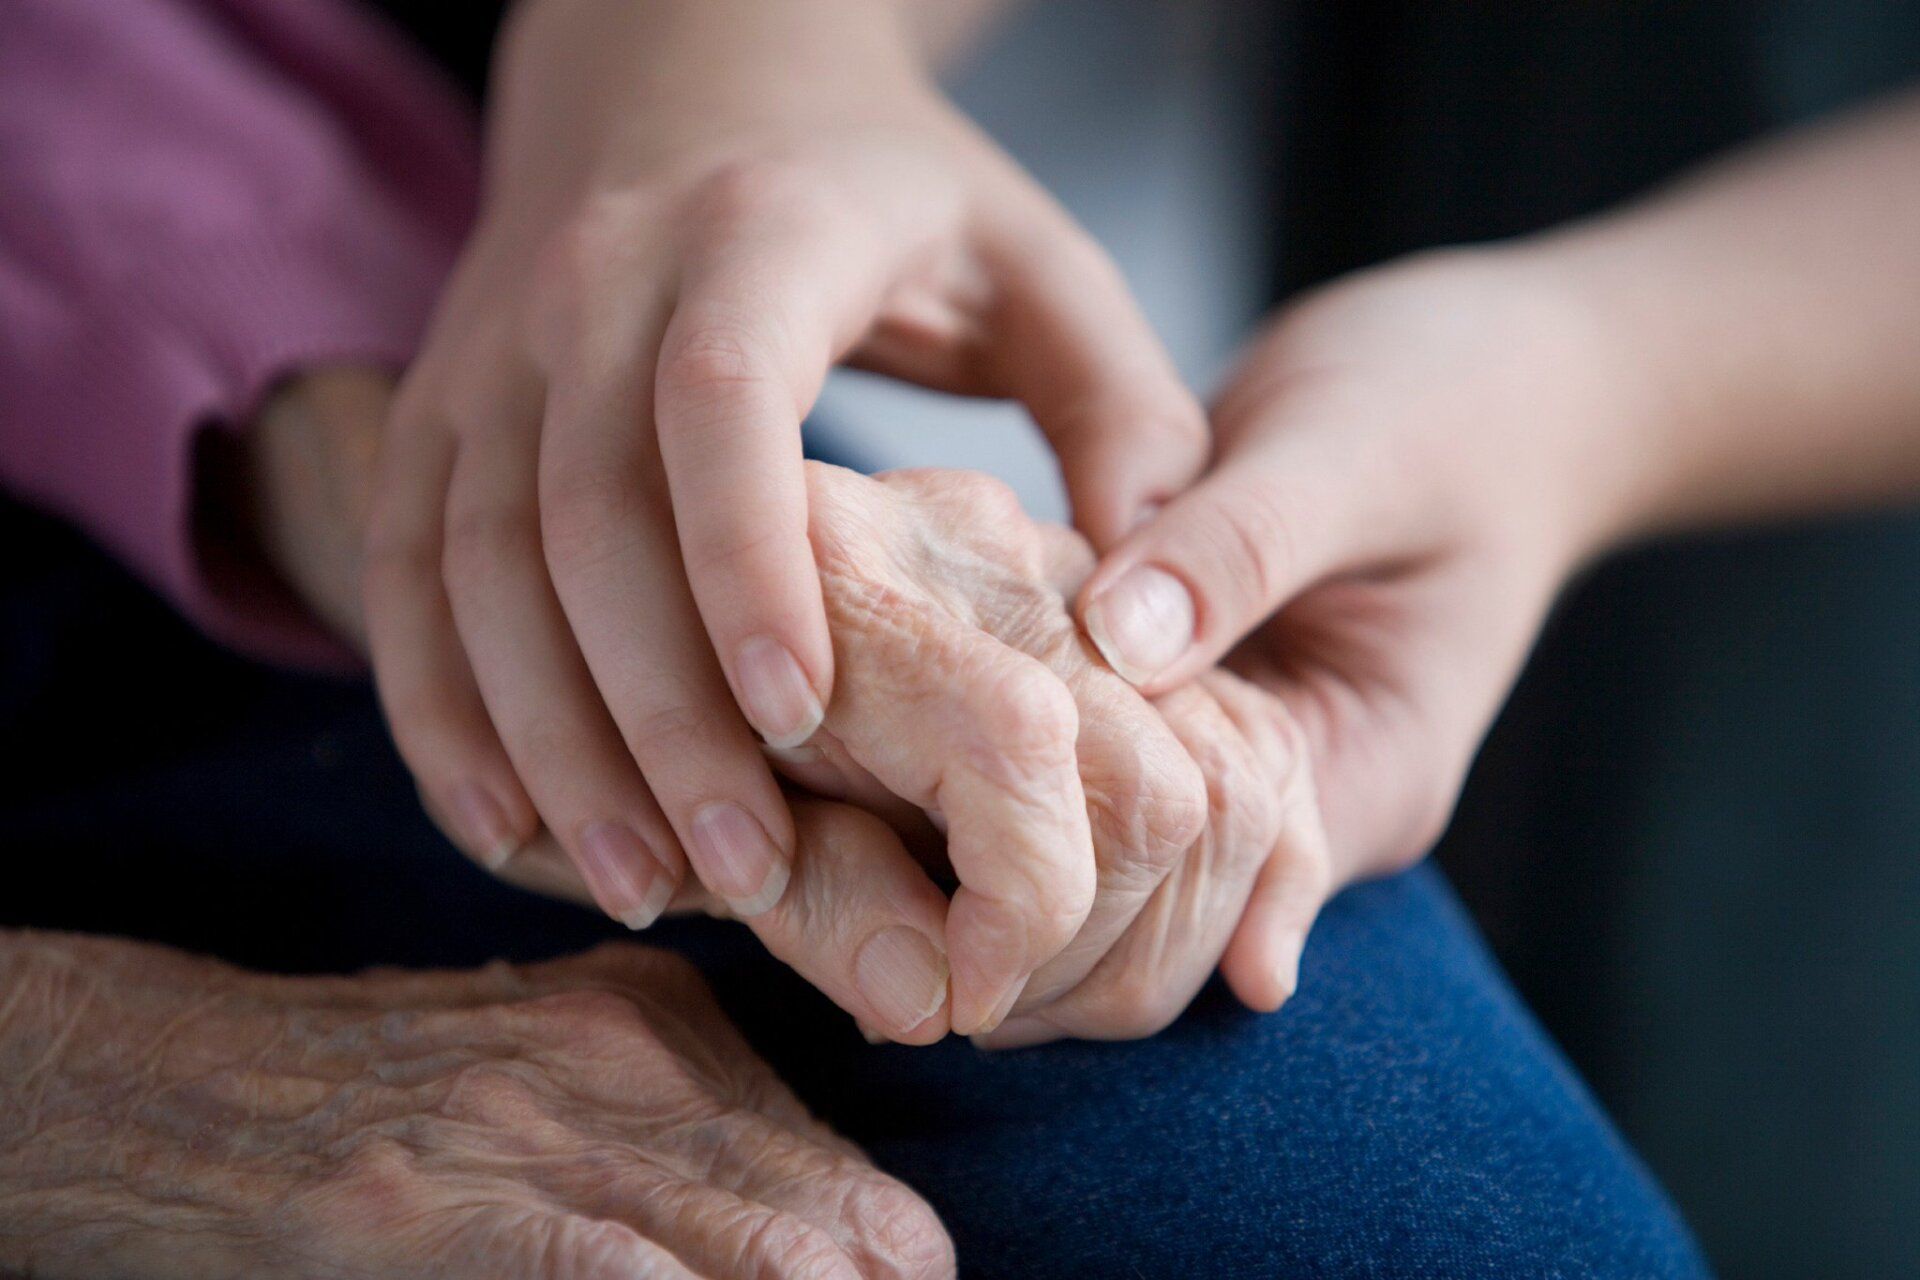 A younger person holding an elderly persons hand during time of loss and grief